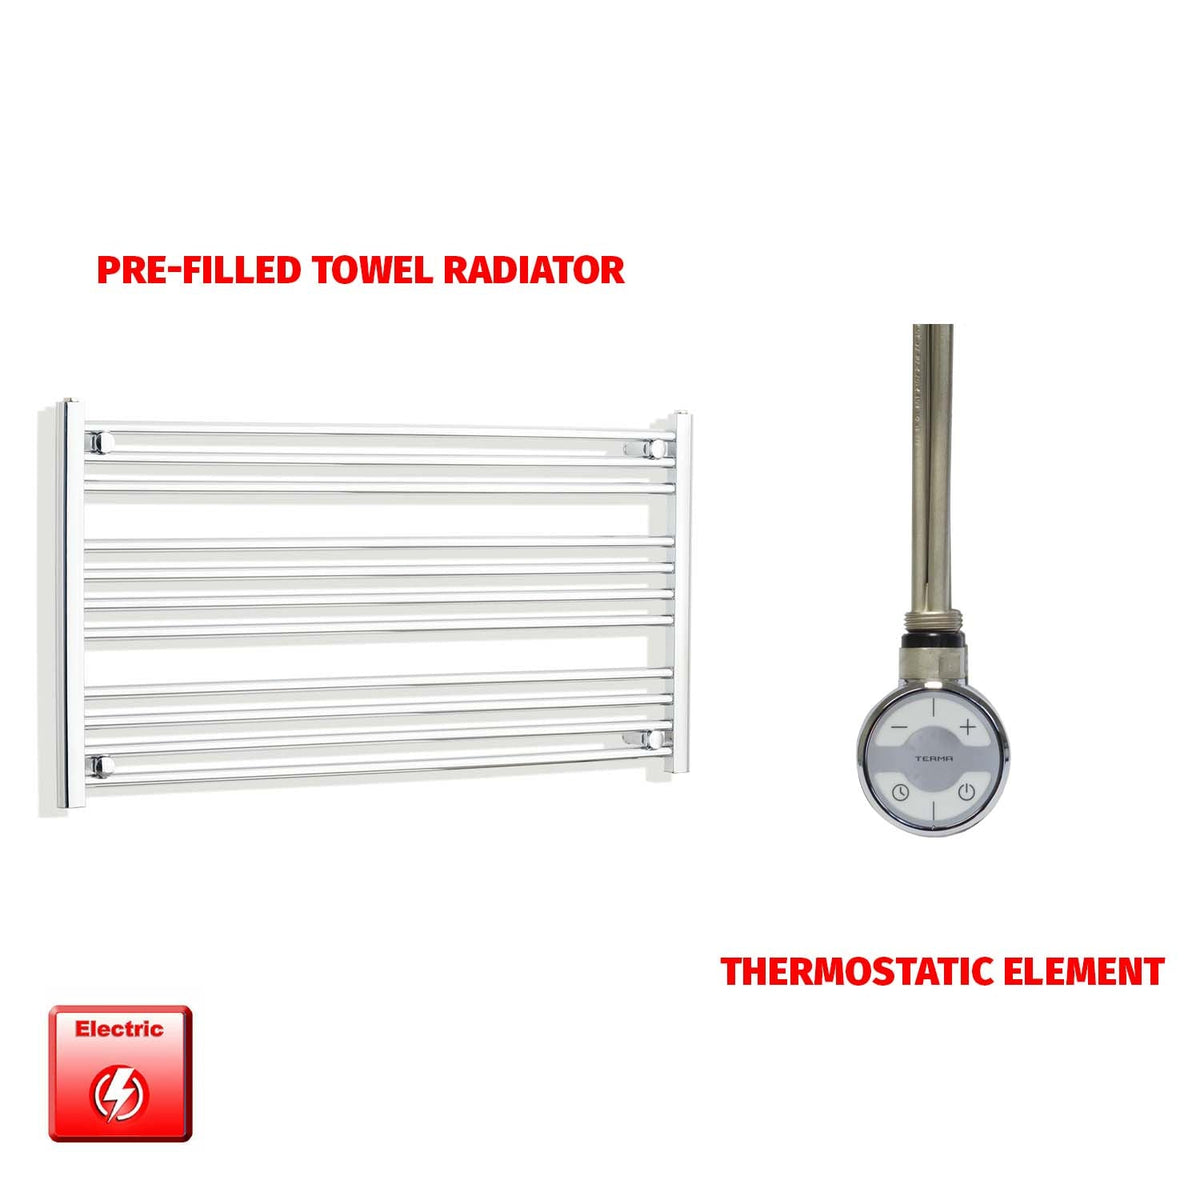 600 x 1000 Pre-Filled Electric Heated Towel Radiator Straight Chrome MOA Thermostatic element no timer